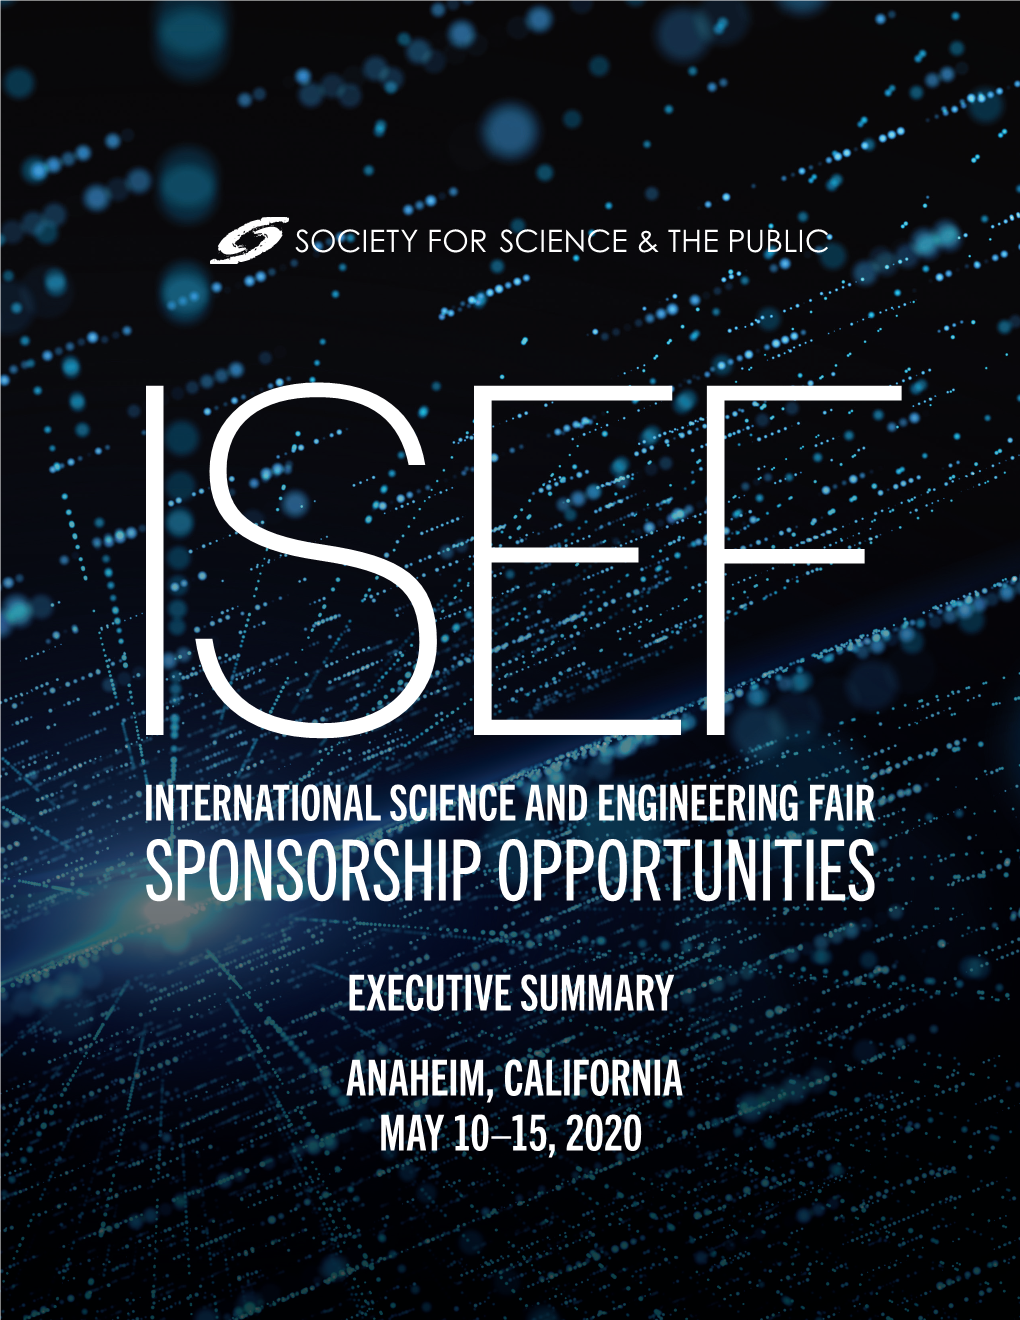 International Science and Engineering Fair Sponsorship Opportunities